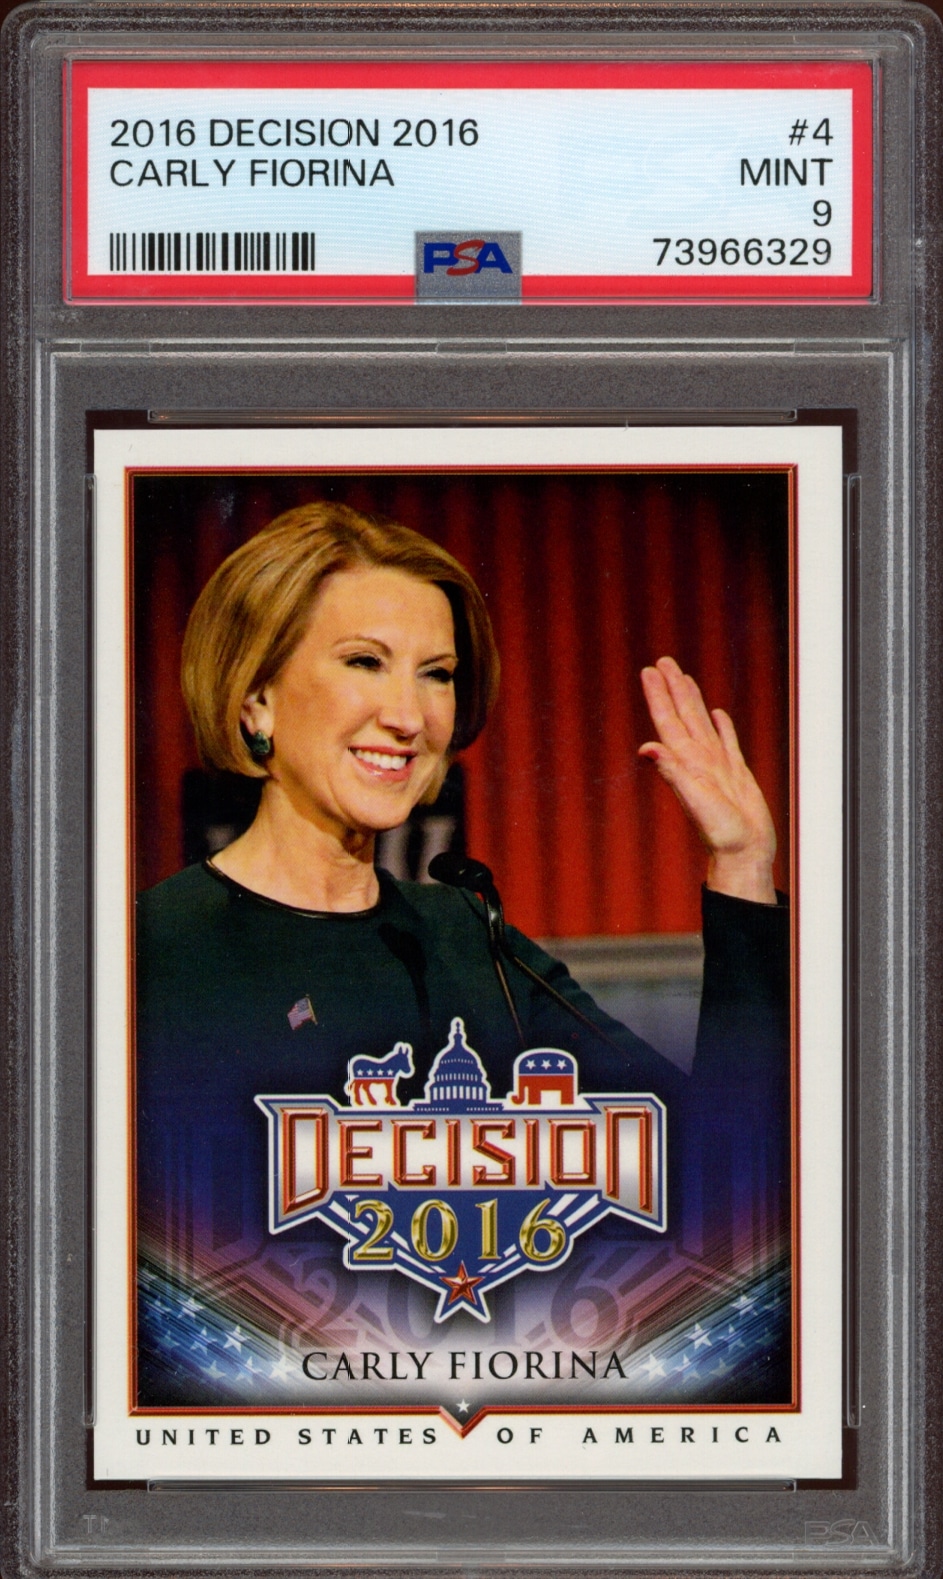 PSA-graded Mint 9 Carly Fiorina 2016 Decision trading card with patriotic design.